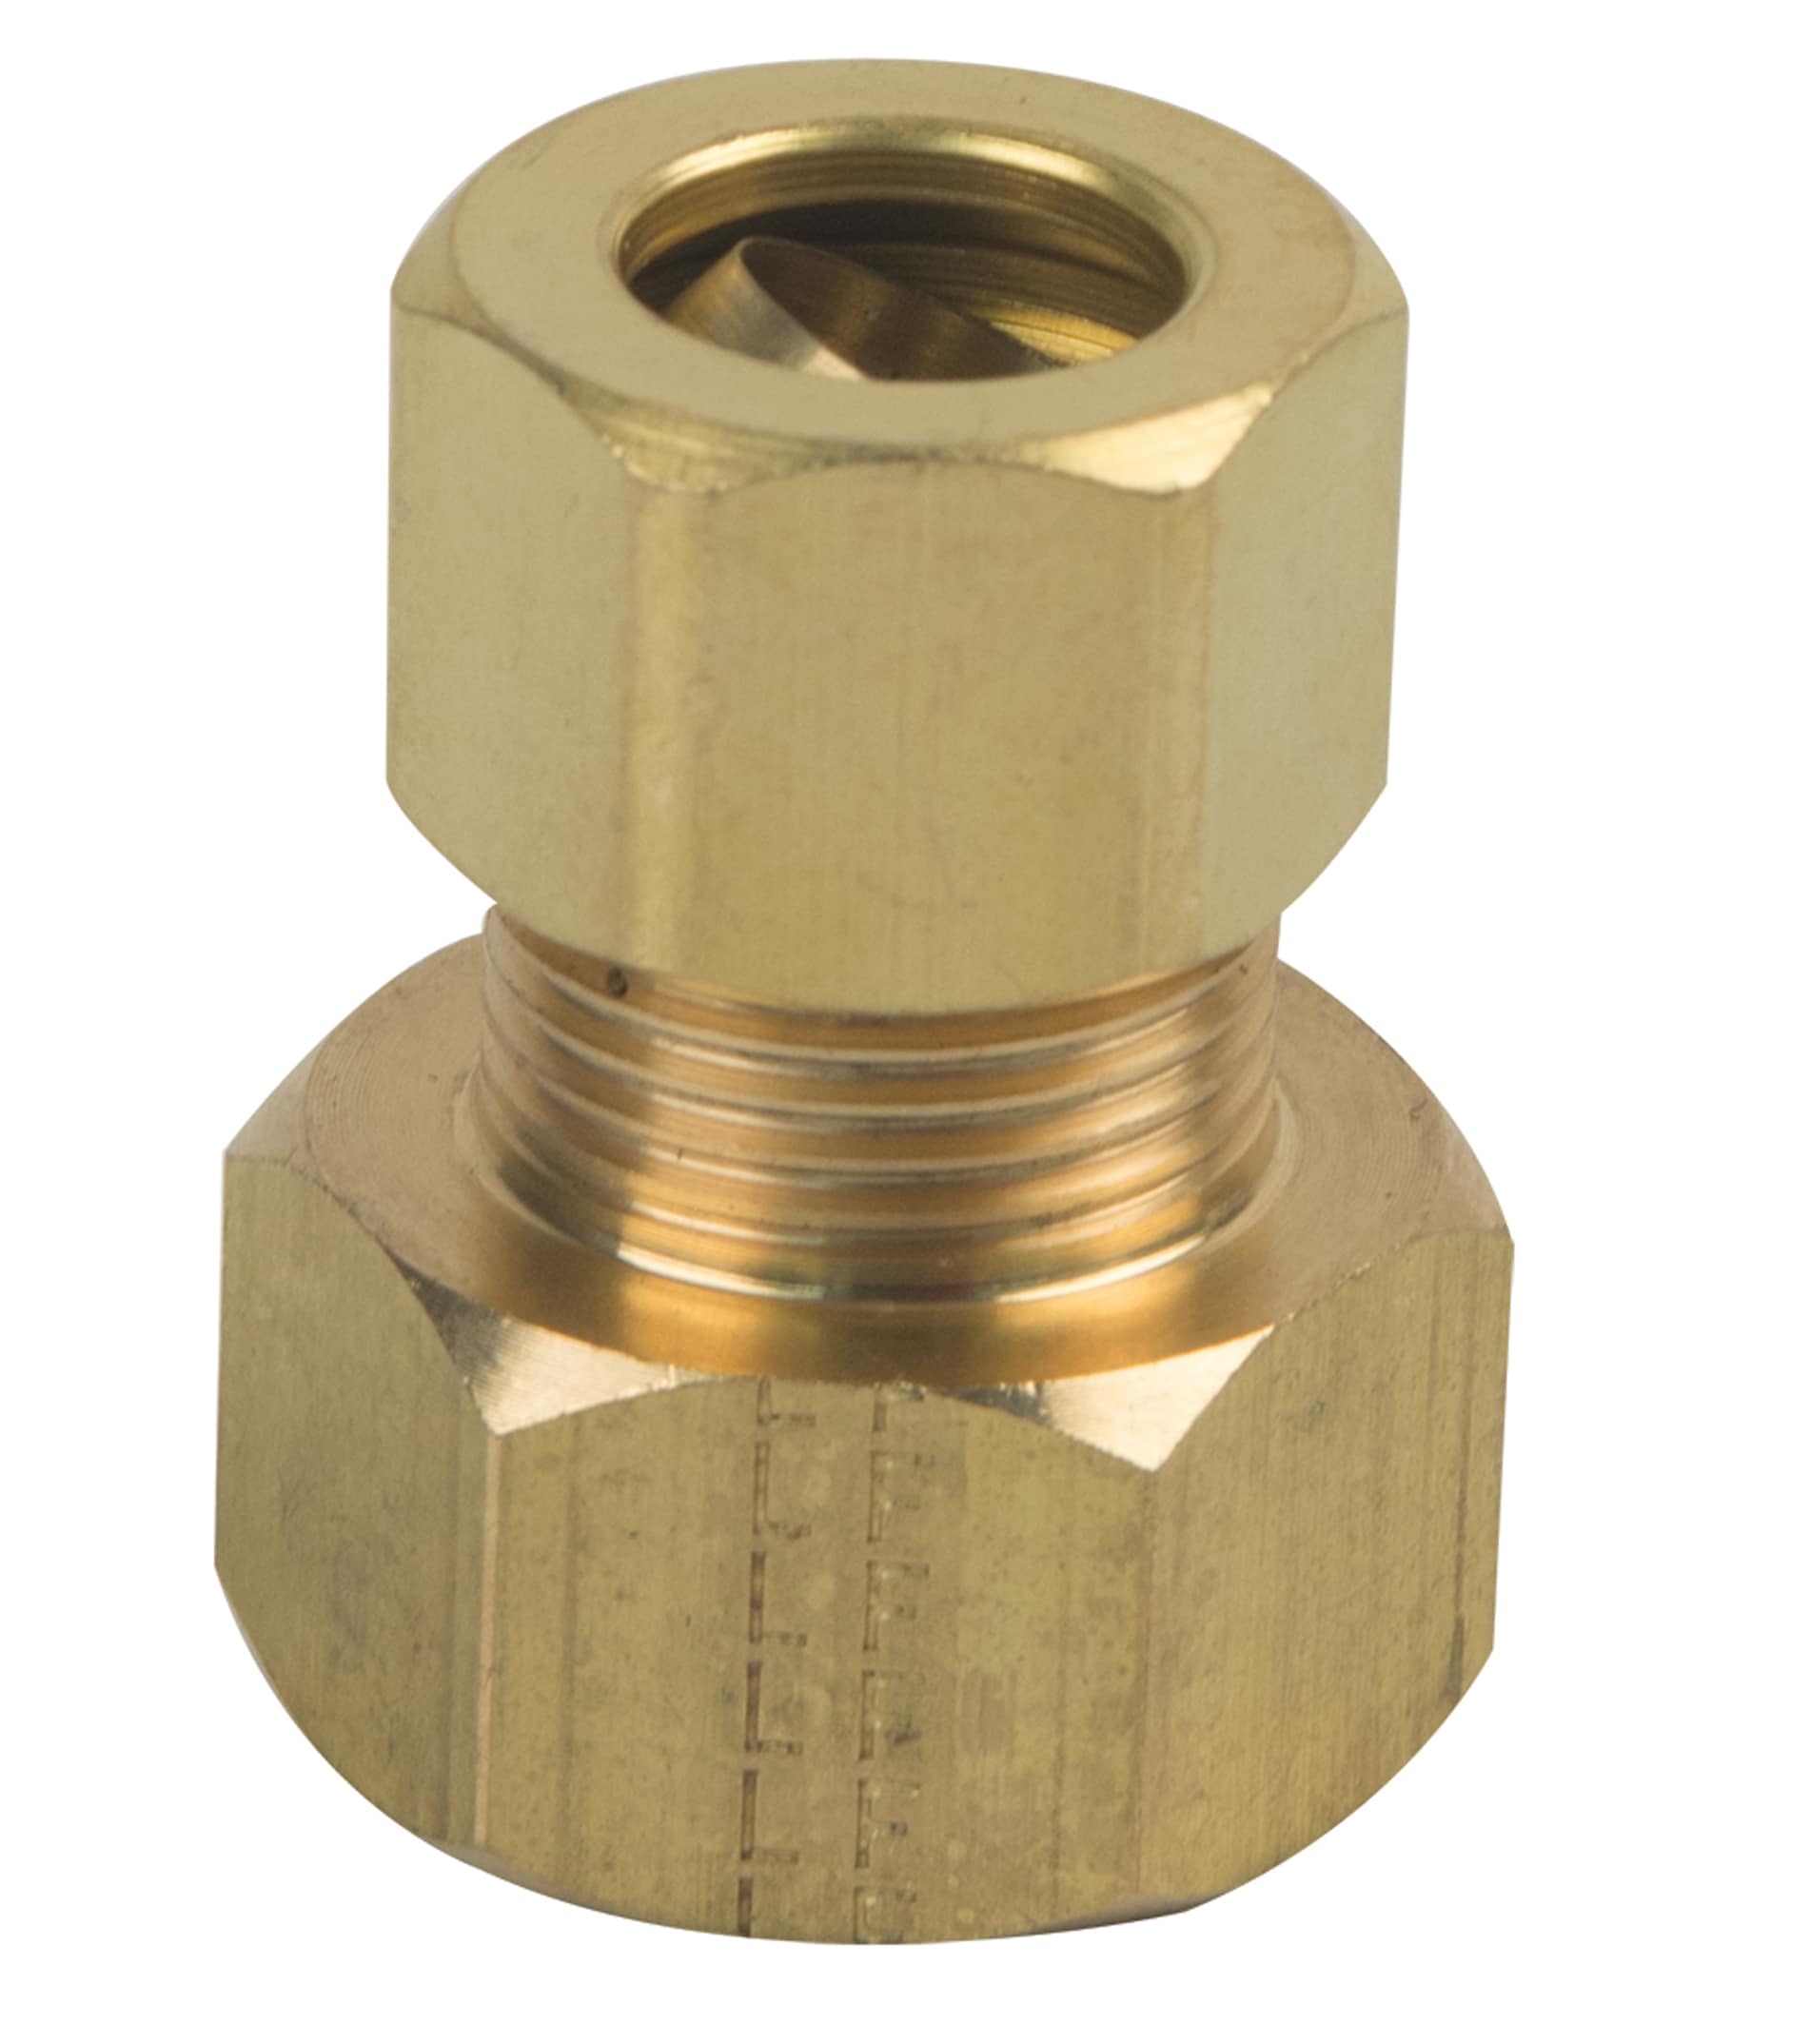 Lead-Free 100 Brass Compression Reducing Union Fittings 5/8" x 3/8" OD Tube 